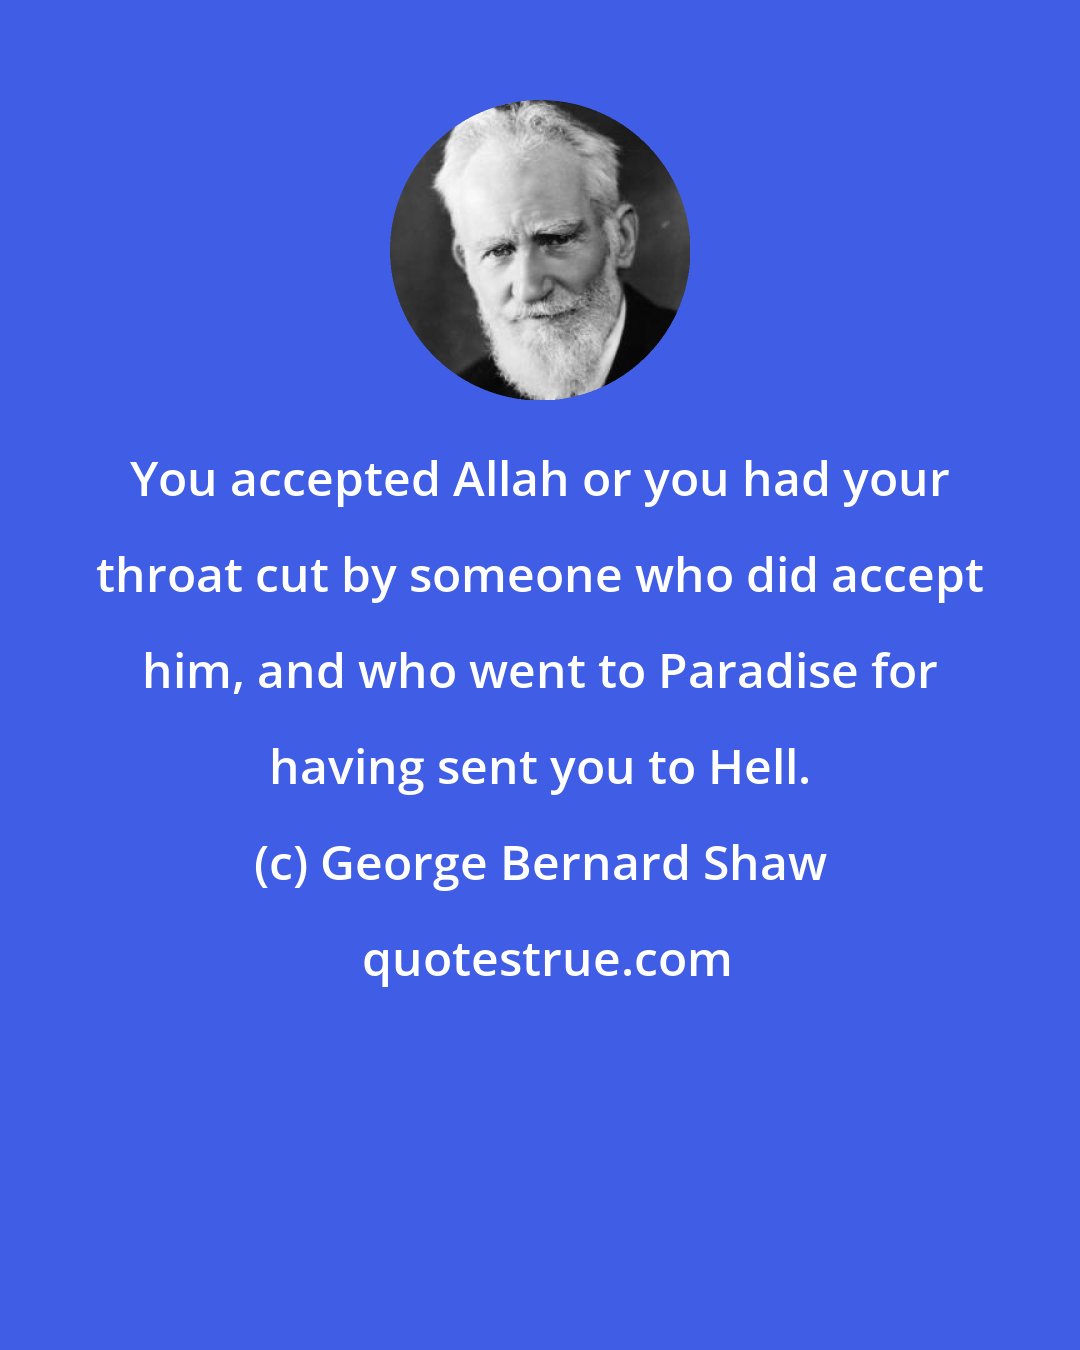 George Bernard Shaw: You accepted Allah or you had your throat cut by someone who did accept him, and who went to Paradise for having sent you to Hell.